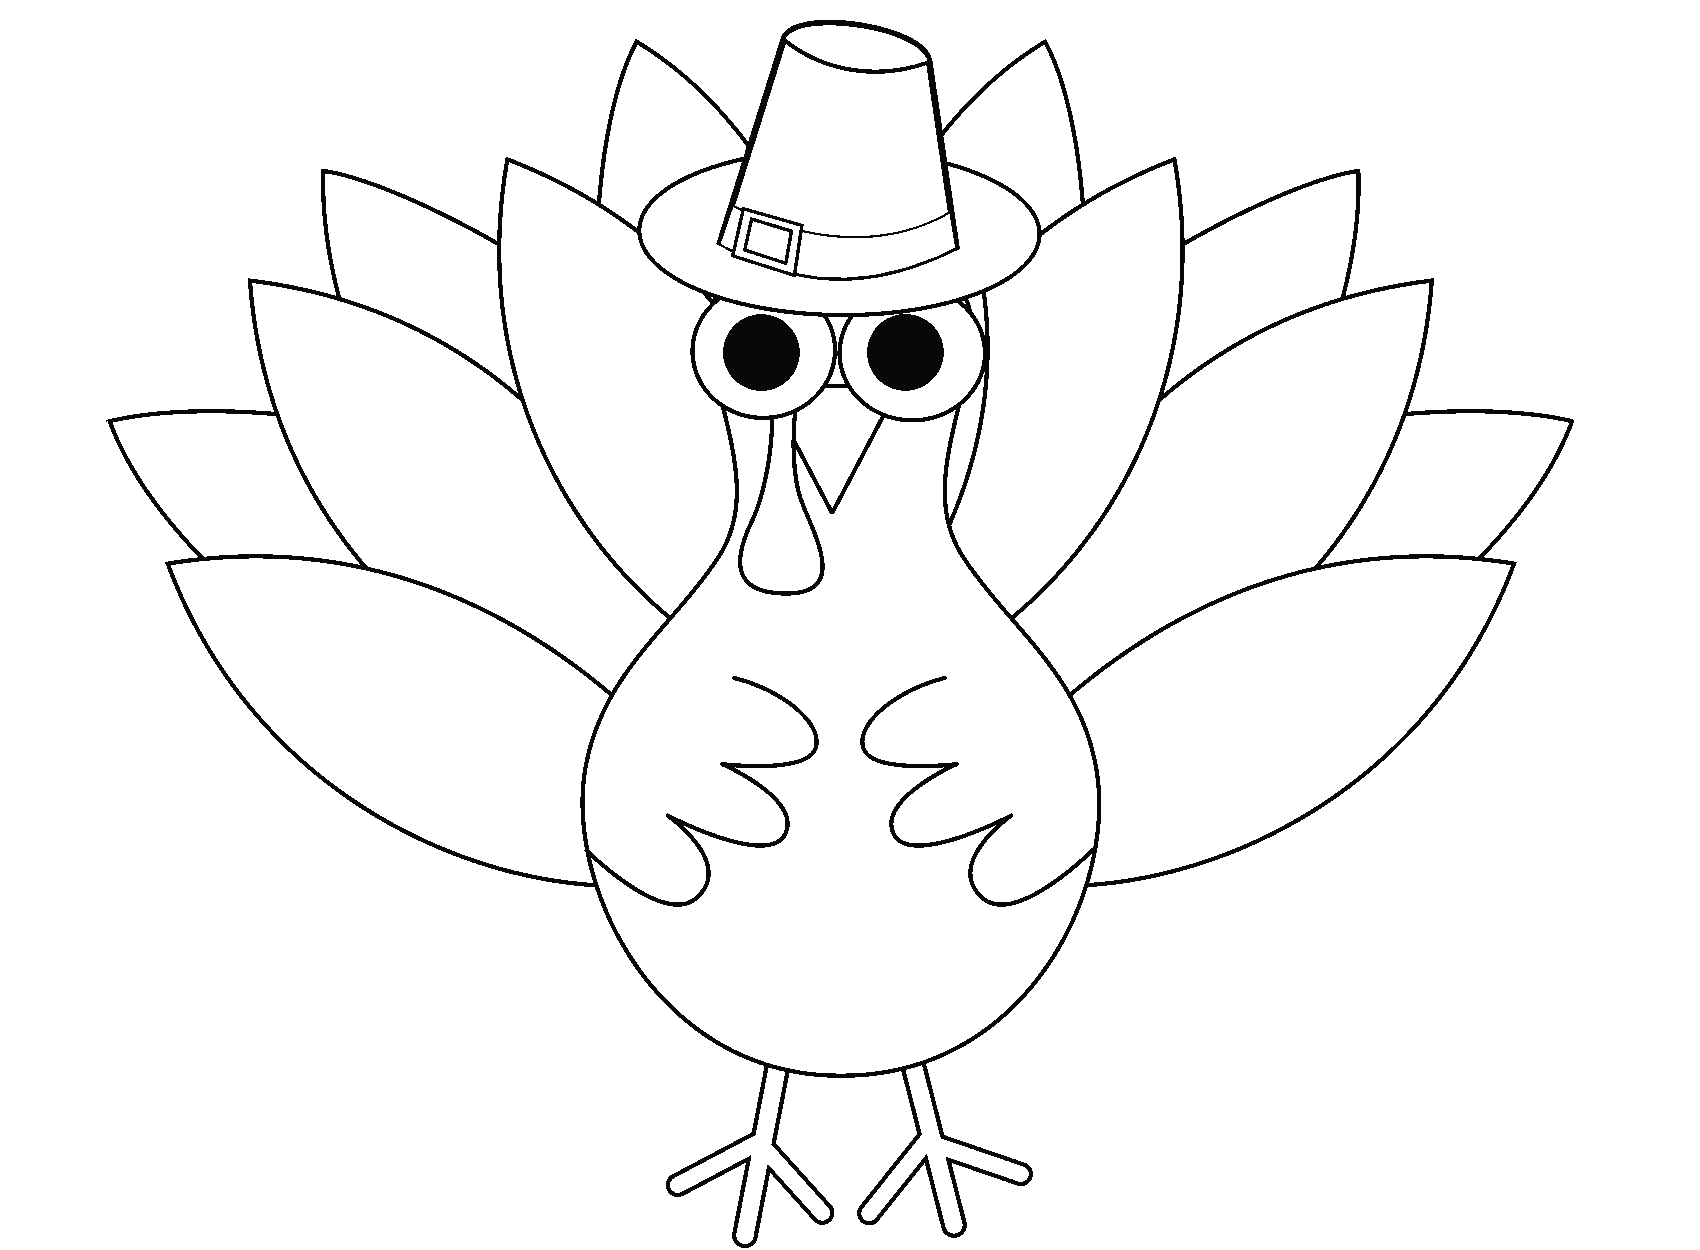 Easy to Draw Thanksgiving Turkey Coloring Pages